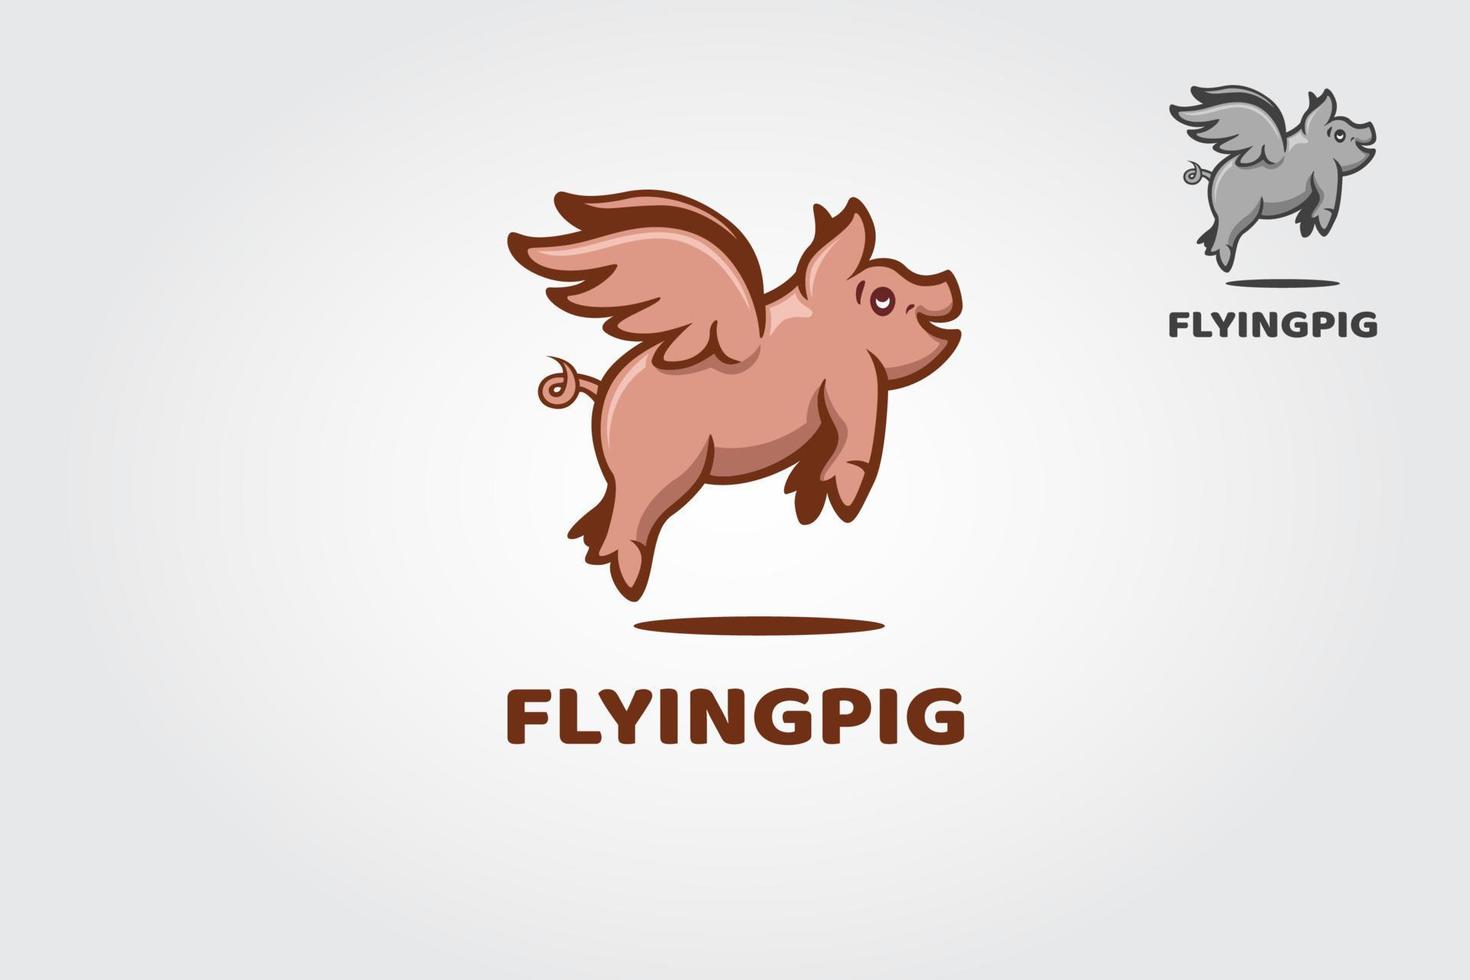 Flying Pig Vector Logo Template. The illustration fantasy pig logo design. Take a touch of creativity and fun for with your business.